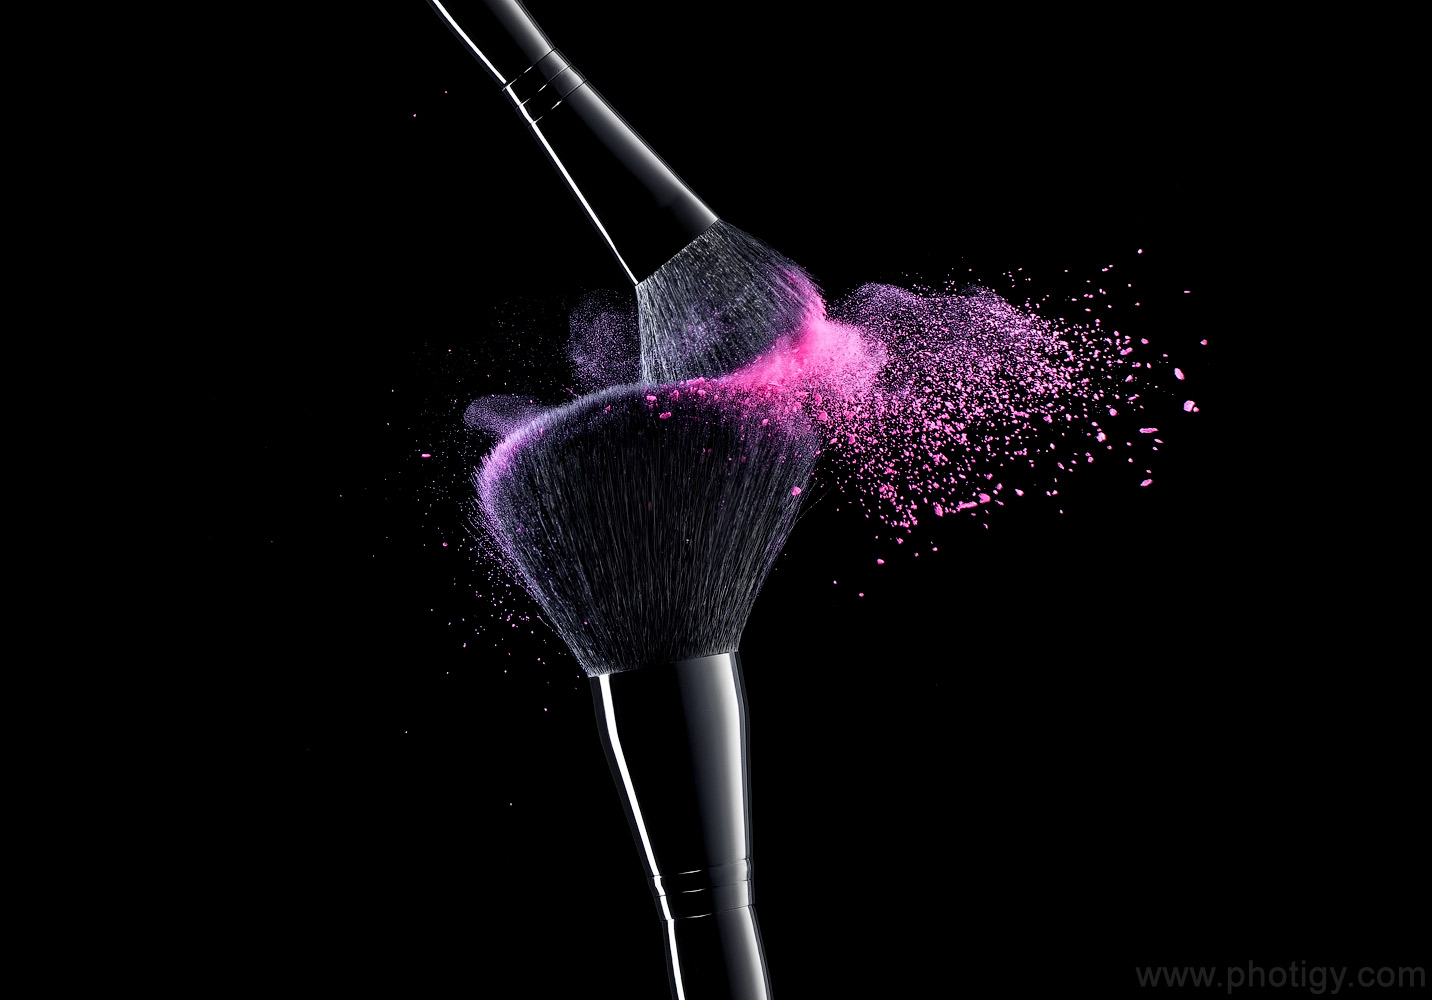 Hi-Speed Action in Cosmetic Photography (Powder Burst)